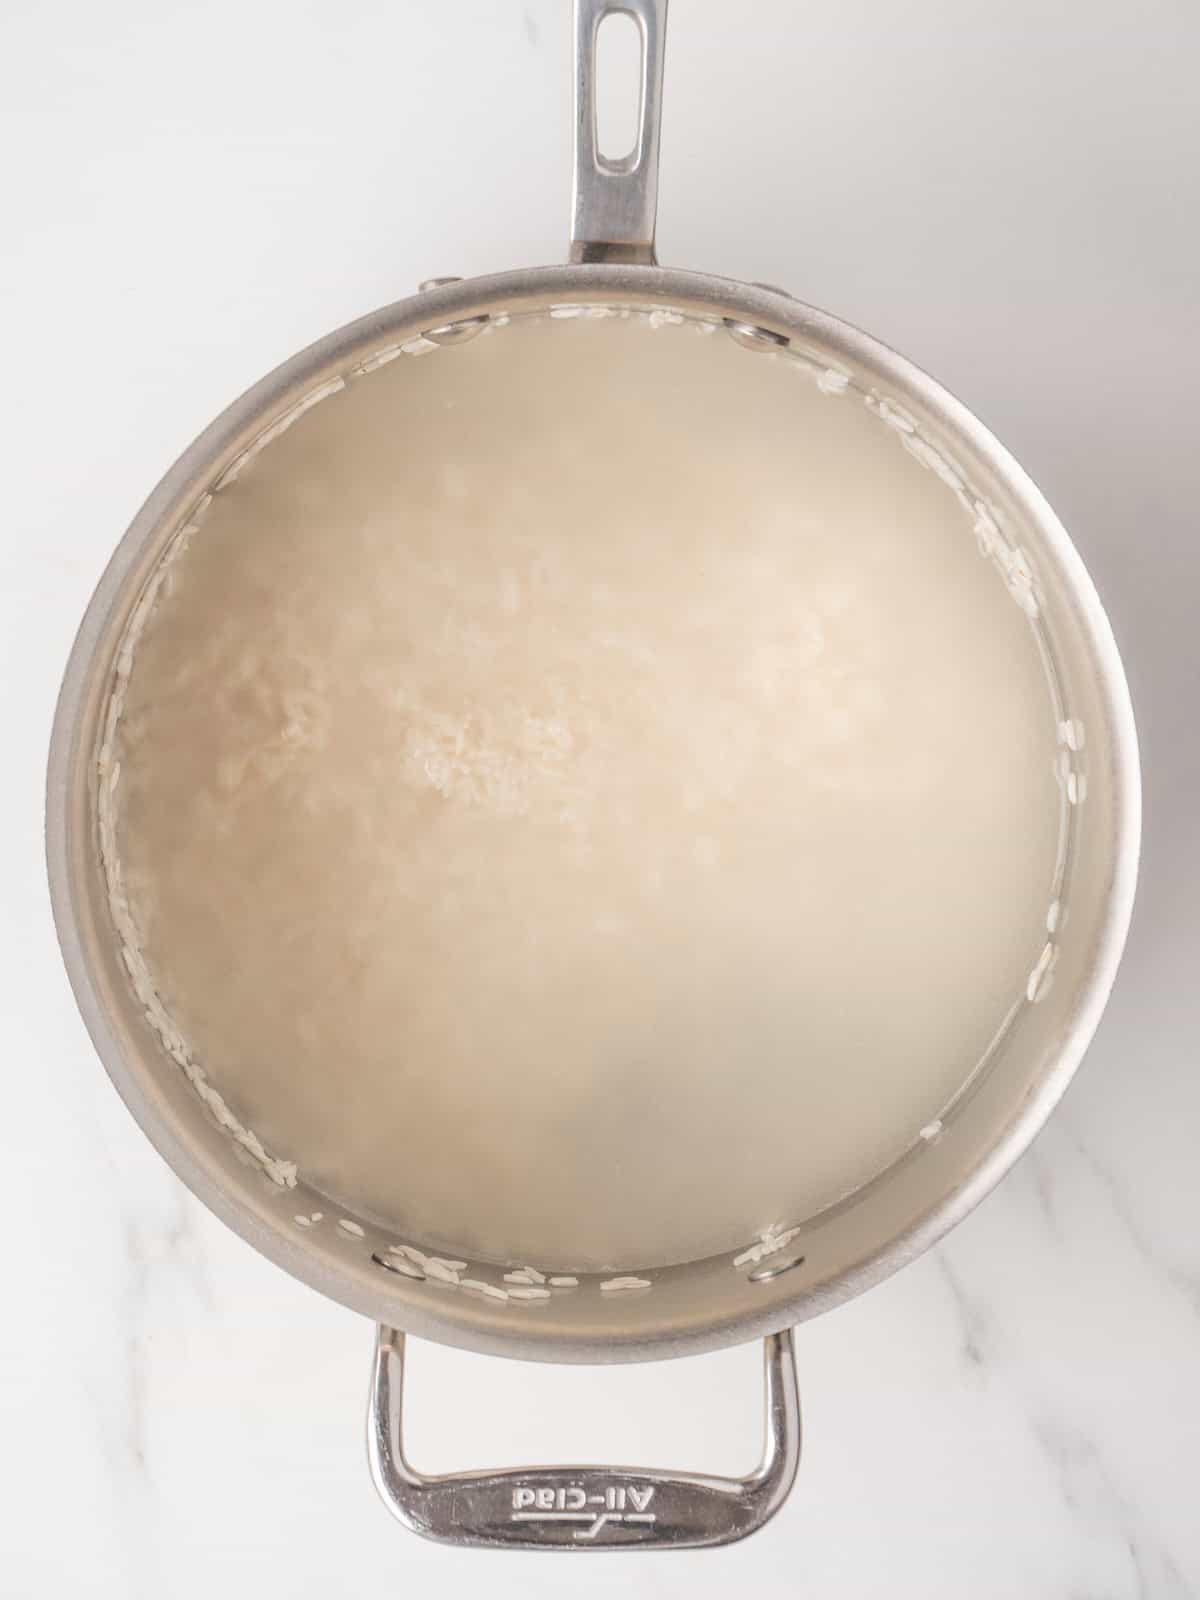 A saucepan with rice and water being boiled together.